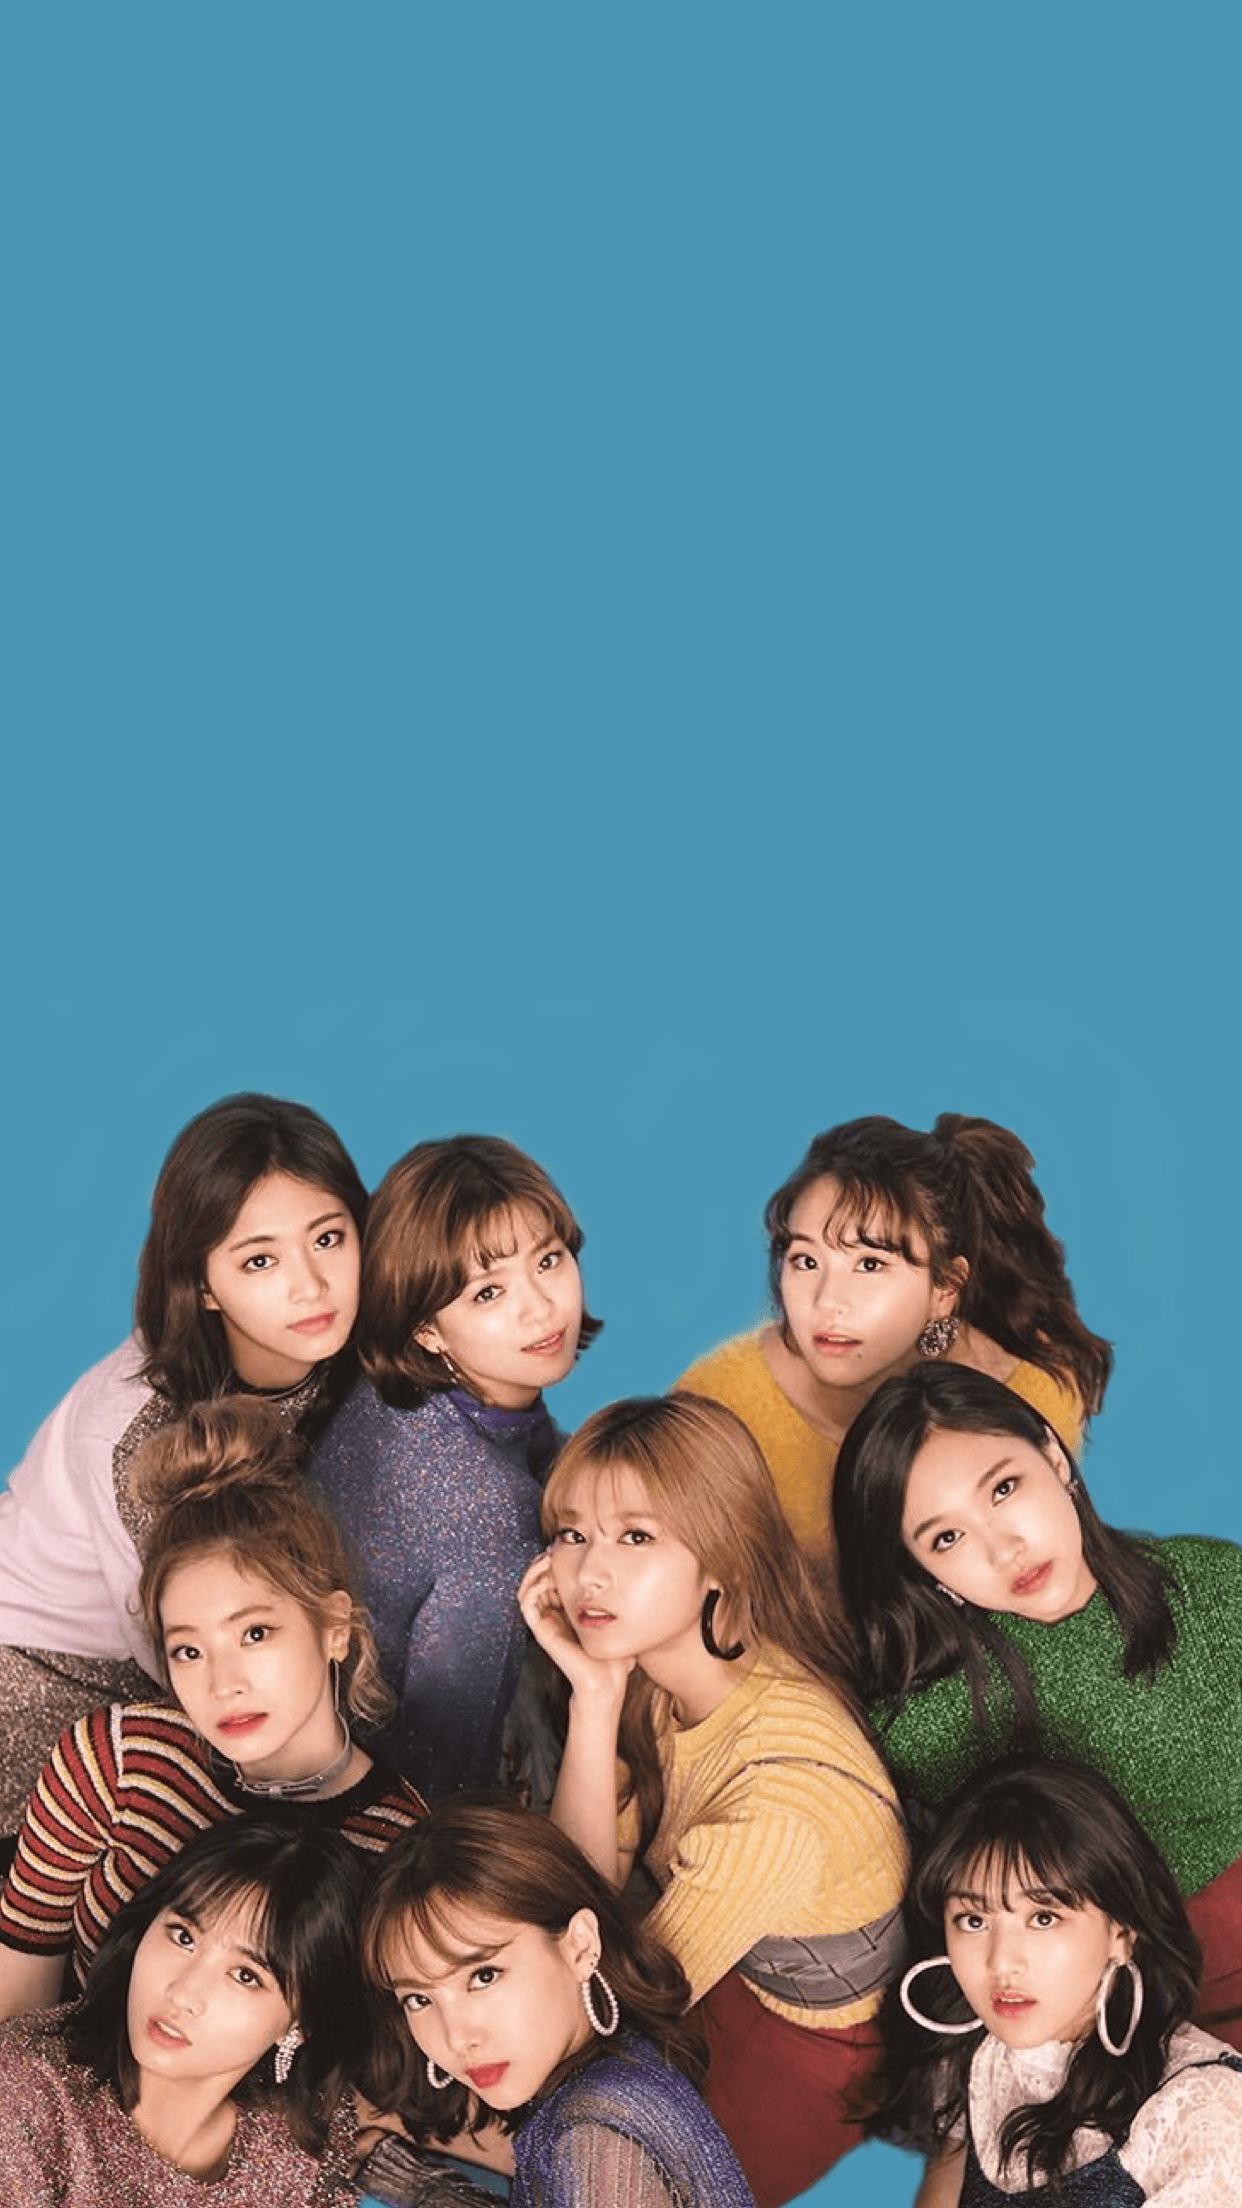 Twice Tt Wallpapers Wallpaper Cave I gathered a bunch of photos of twice you guys can use for wallpapers hope you enjoy the photos i fo. twice tt wallpapers wallpaper cave